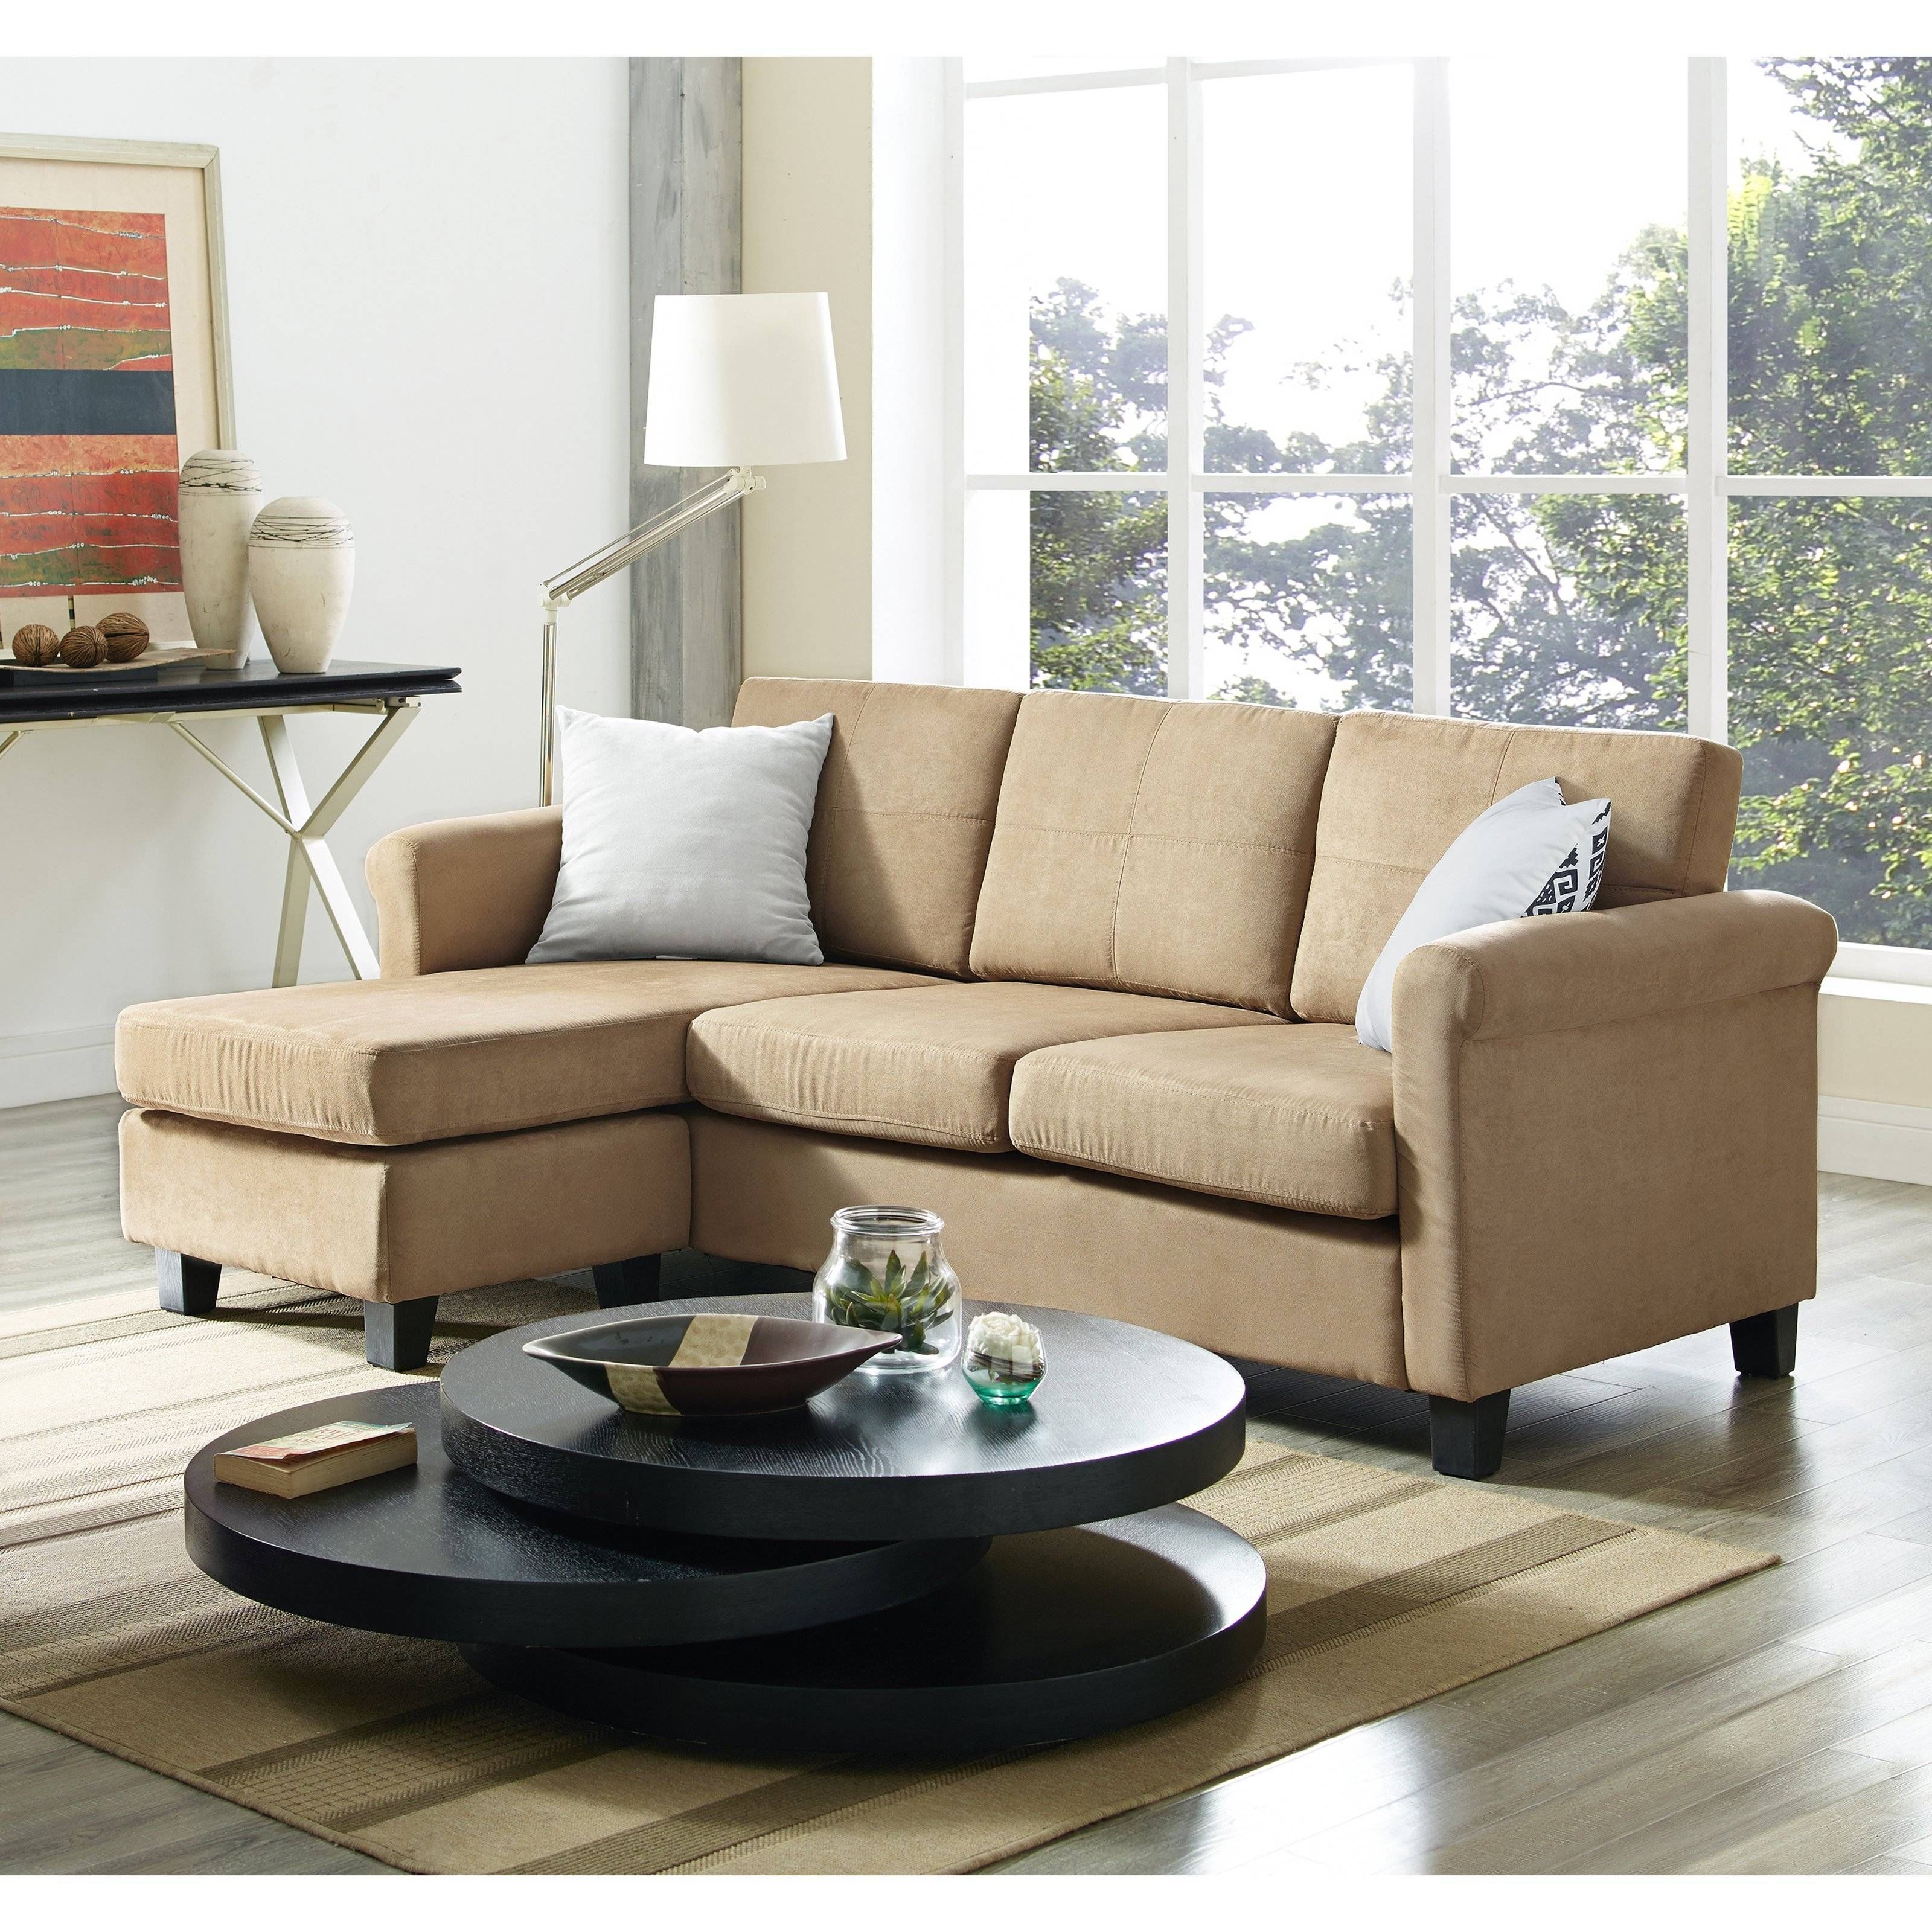 Dorel Living Small Spaces Configurable Sectional Sofa | Hayneedle For Small Spaces Configurable Sectional Sofas (View 6 of 15)